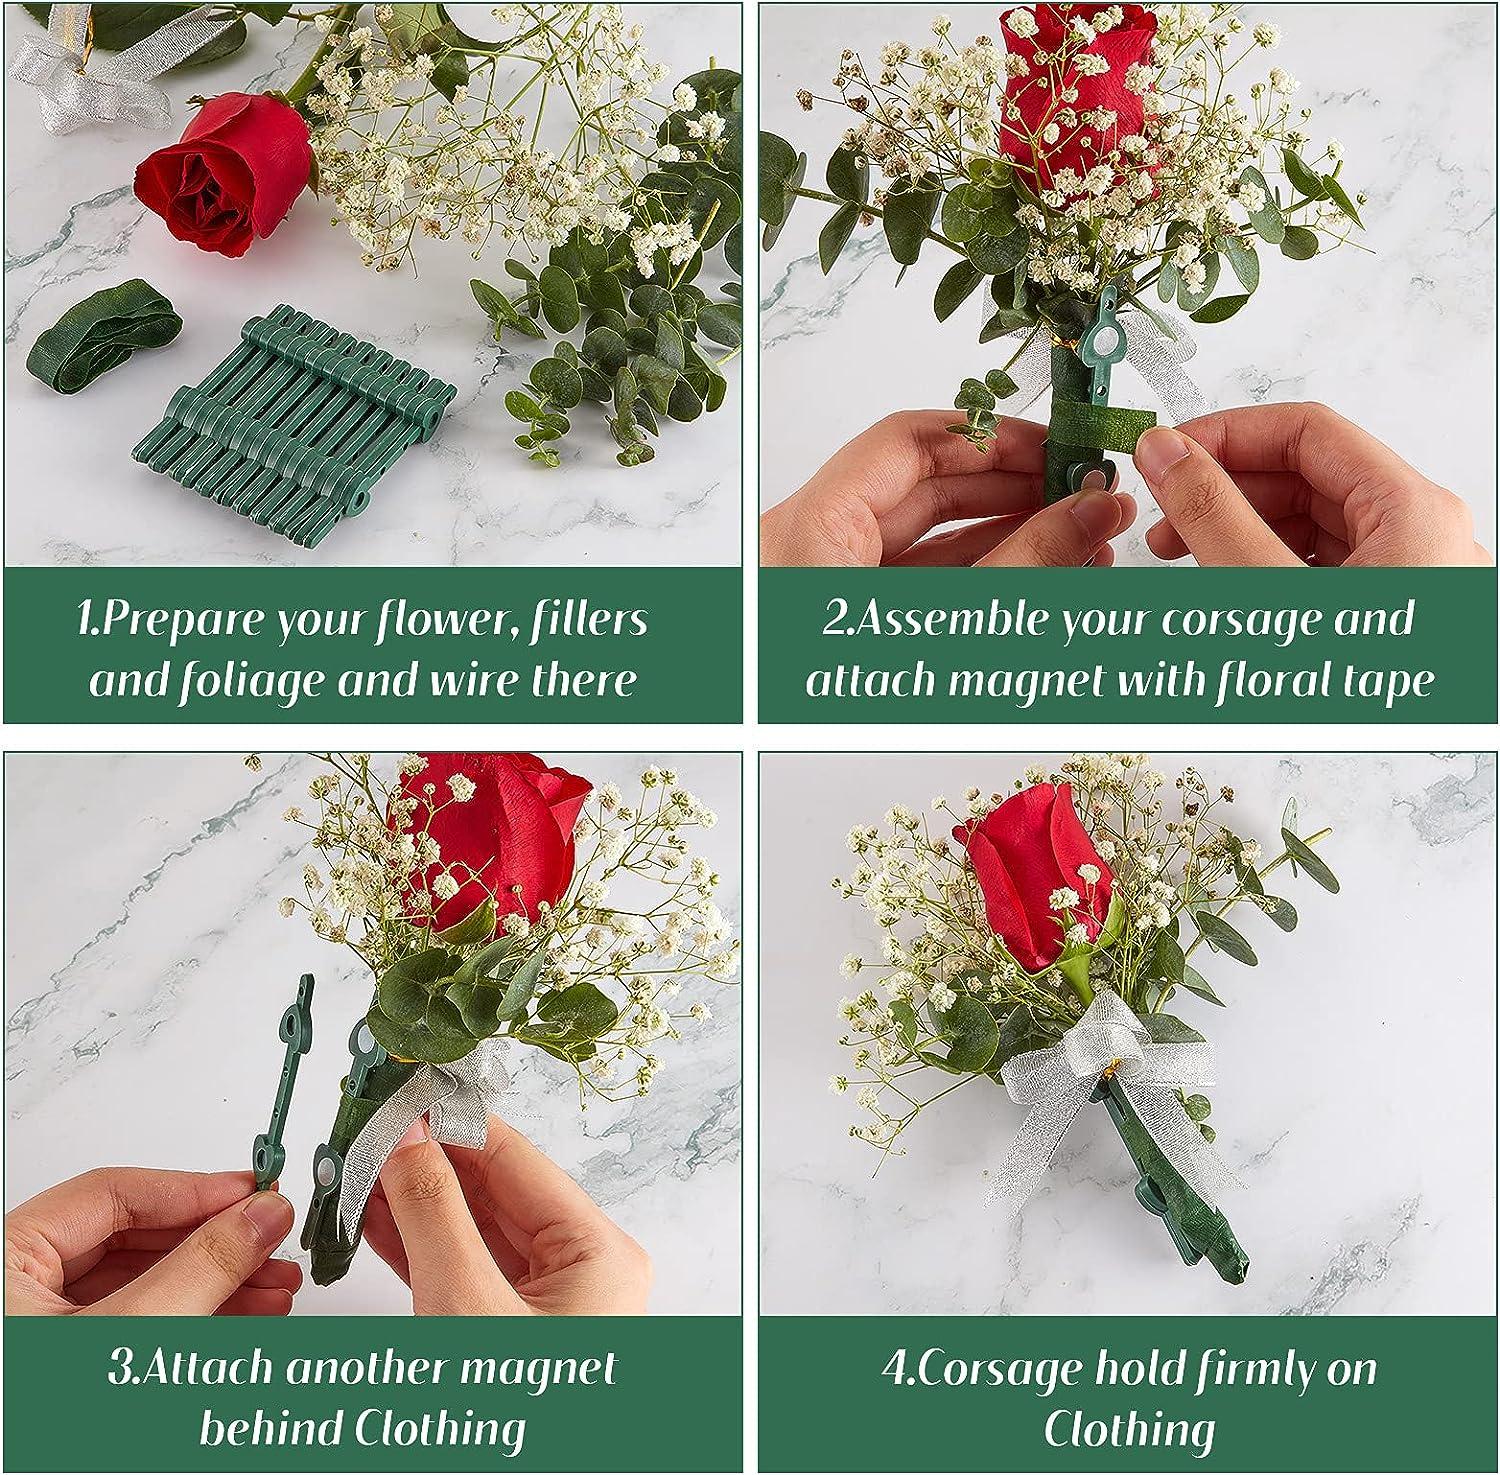 Floral Boutonniere Magnets Corsage Brooches Magnet and Elastic Pearl Wrist  Bands Wristlets Corsage Accessories for Handmade Wedding Prom Bride